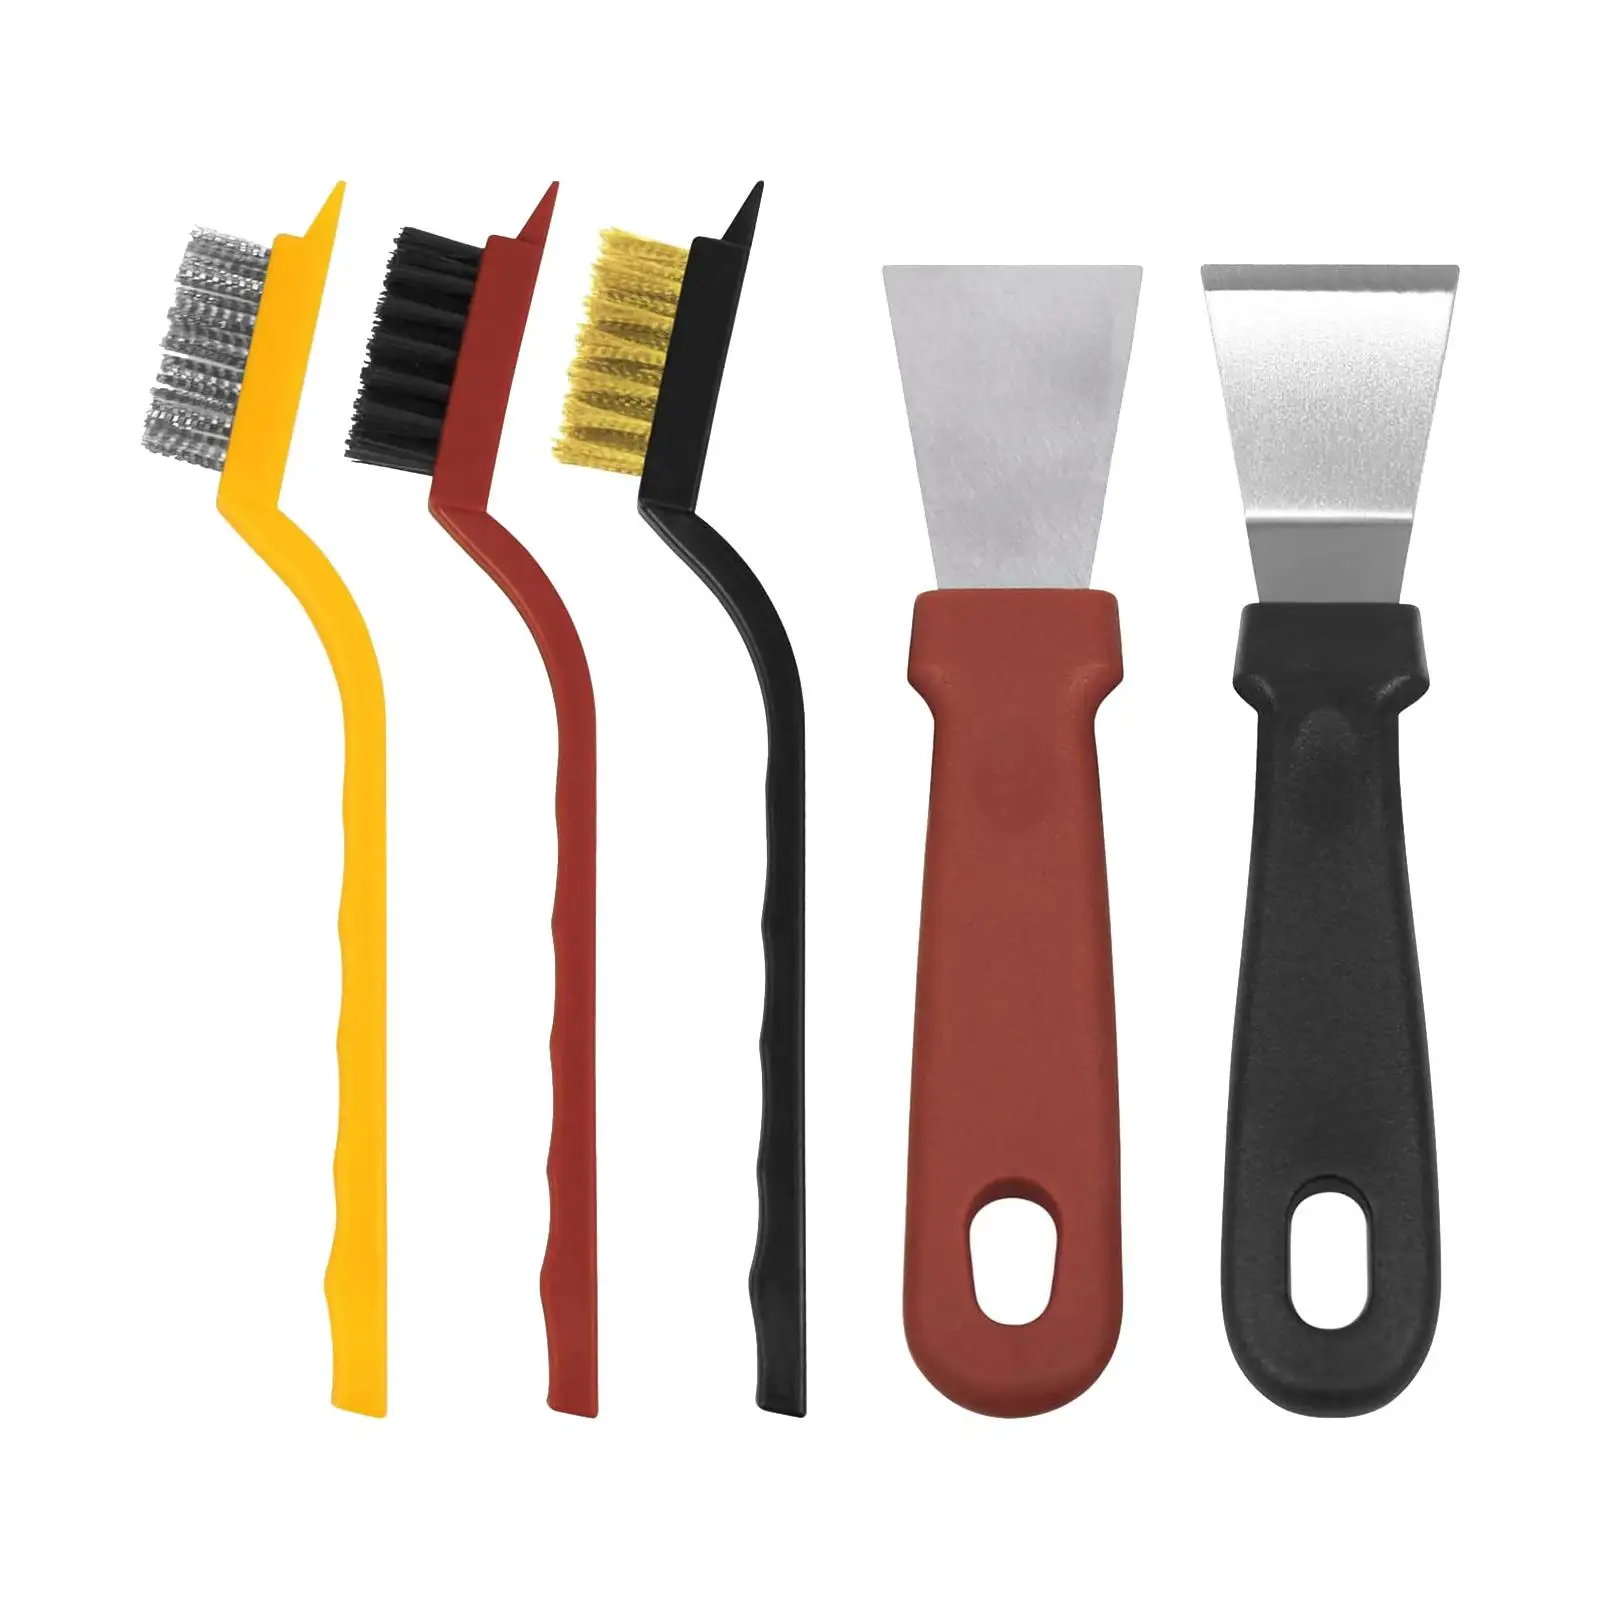 5 Pieces Wire Brush Set Scraper Tool for Dirt Paint Scrubbing Removal Deep Cleaning with Curved Handle Grip Stove Cleaning Brush